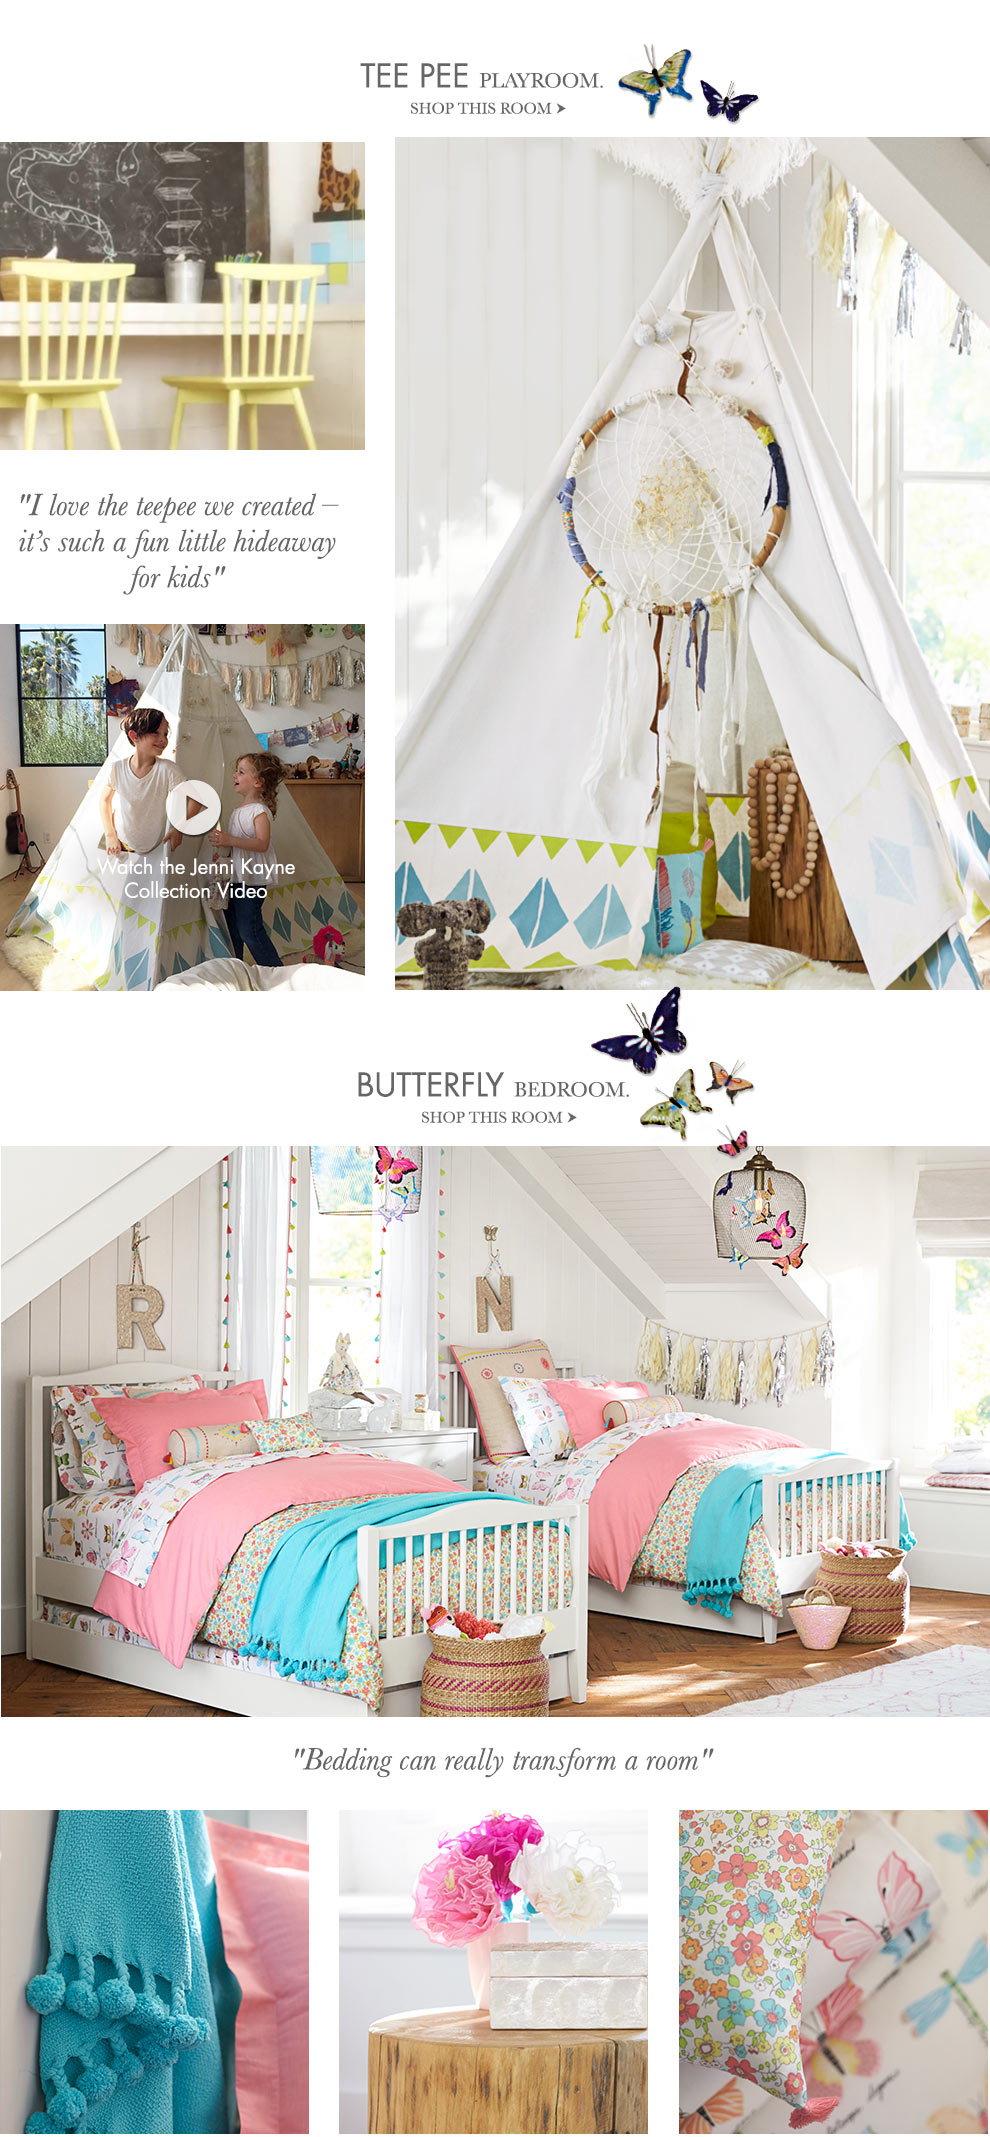 Pottery Barn Collaborates With American Designer Jenni Kayne on Children's  Products